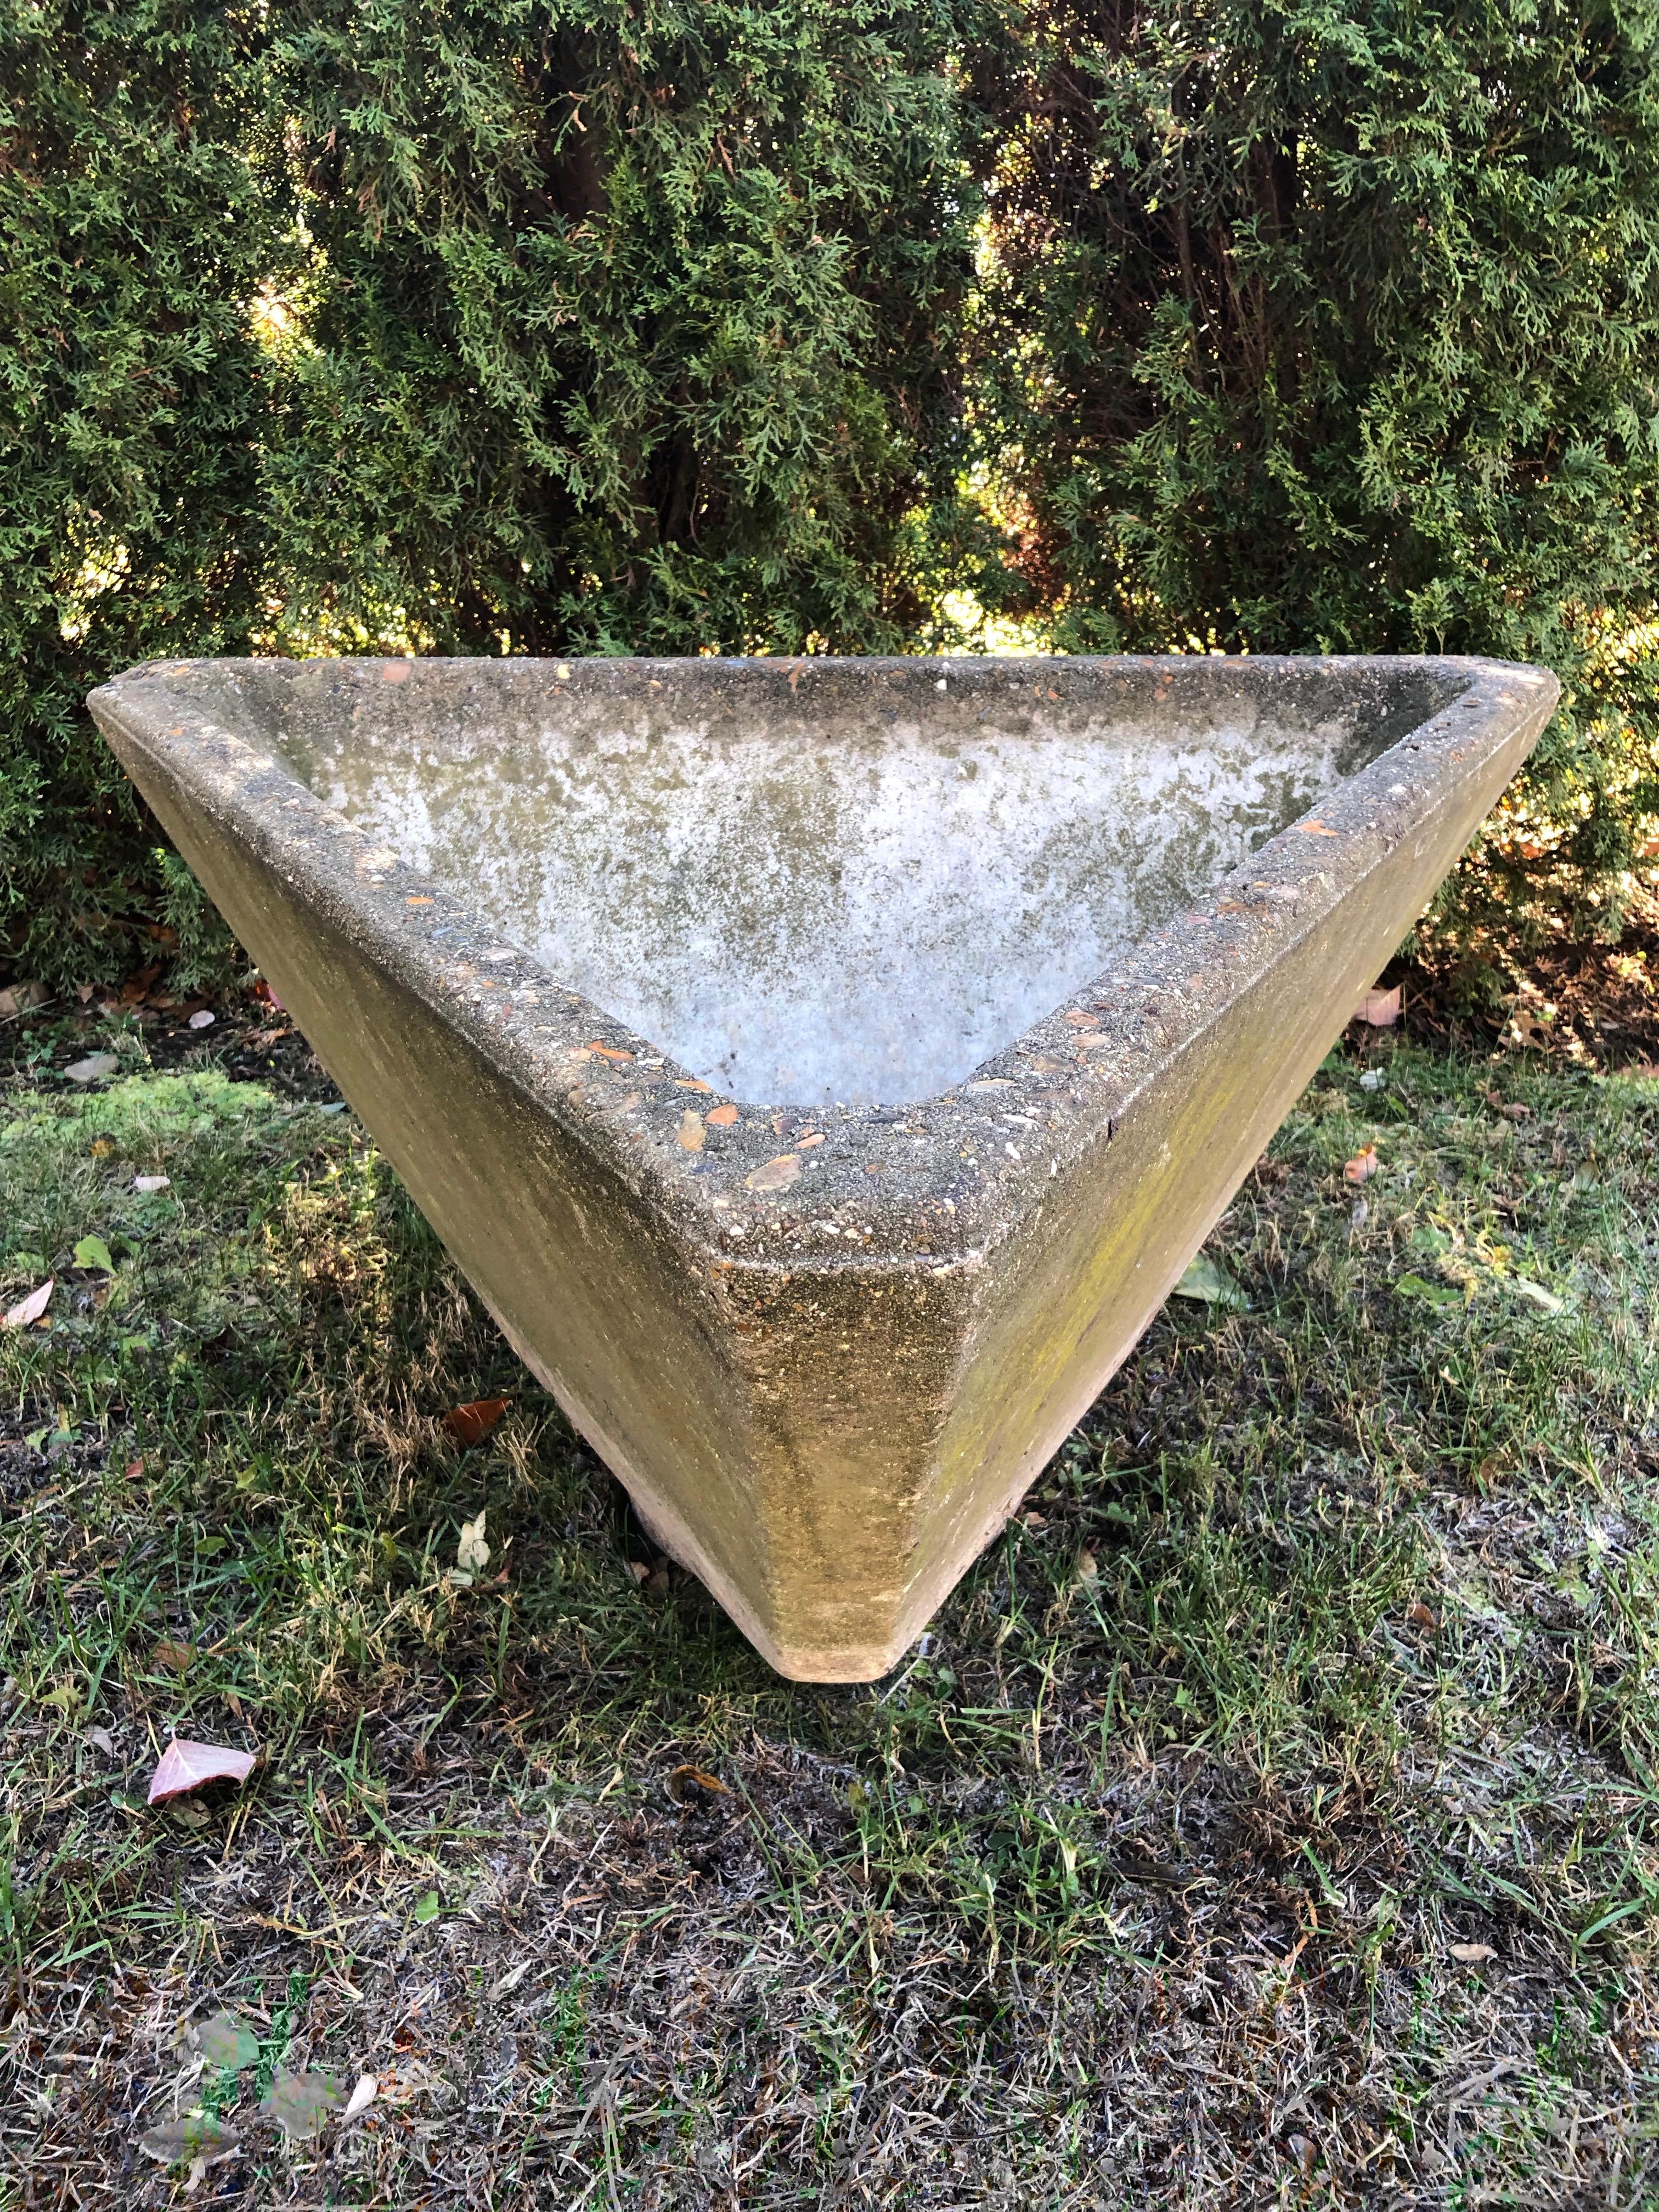 We love unusual forms in the garden and these very large and heavy triangular planters do not disappoint. In very good vintage condition with a beautifully- weathered and greening patina (the beginning of moss), they will develop a mossy surface